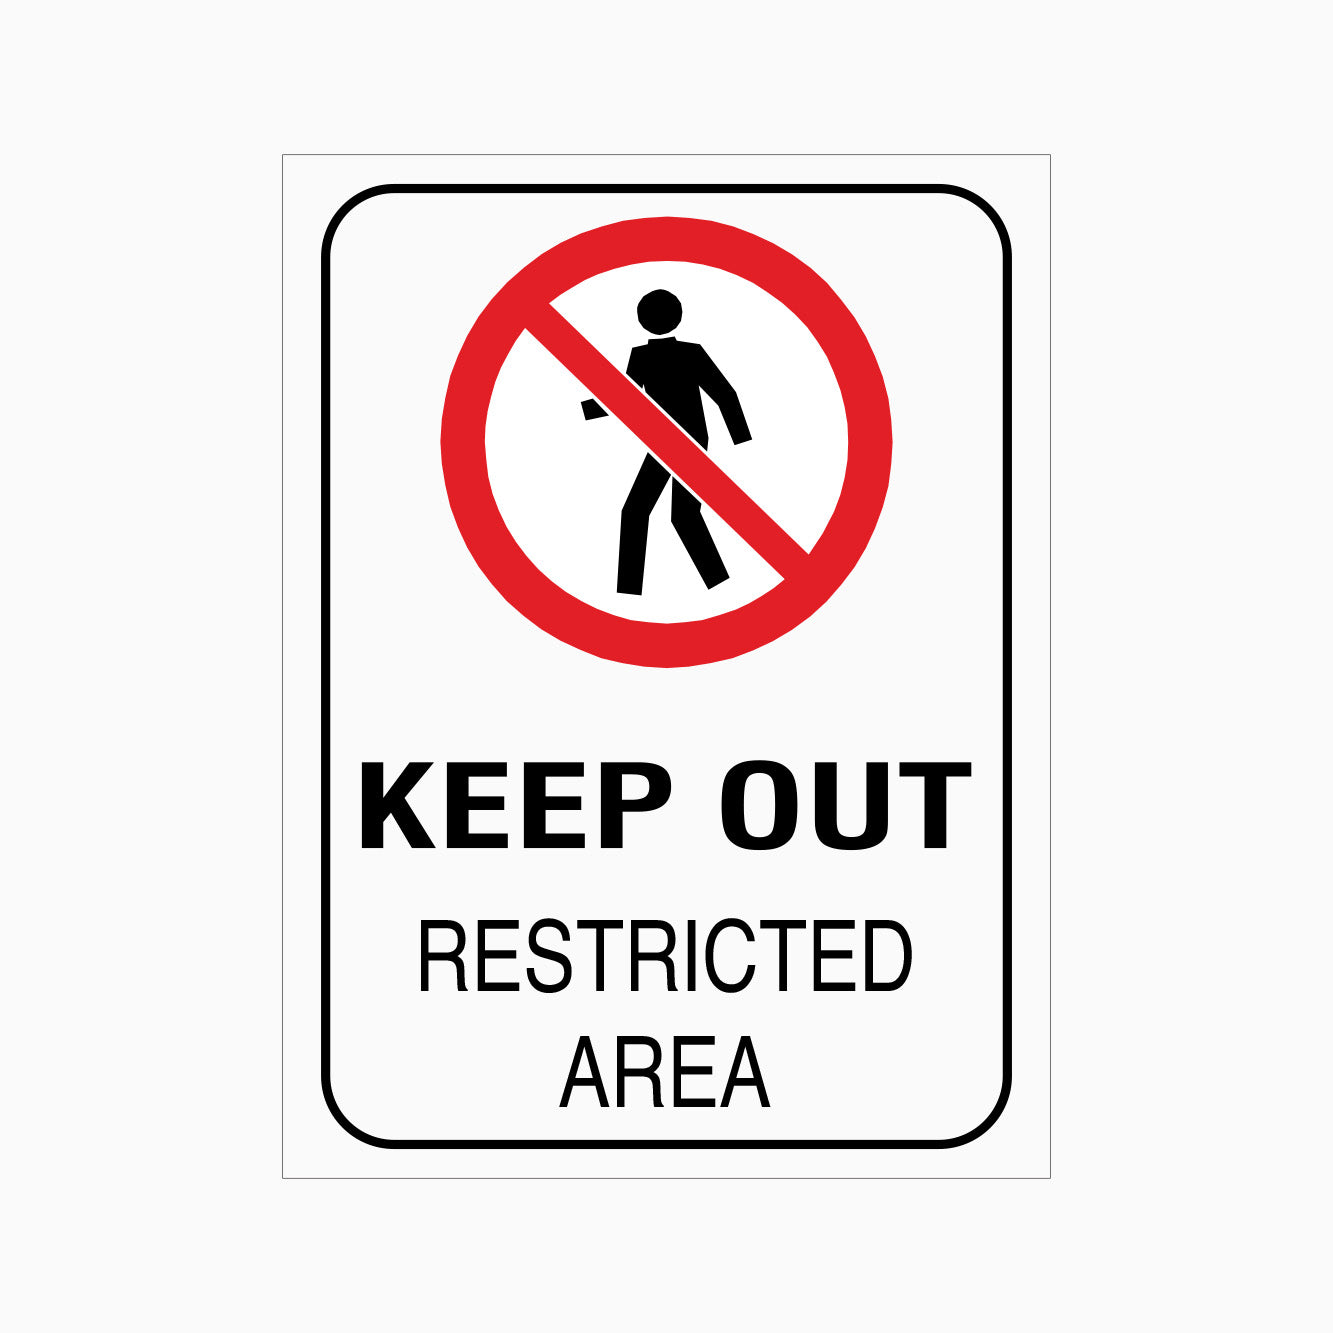 KEEP OUT RESTRICTED AREA SIGN